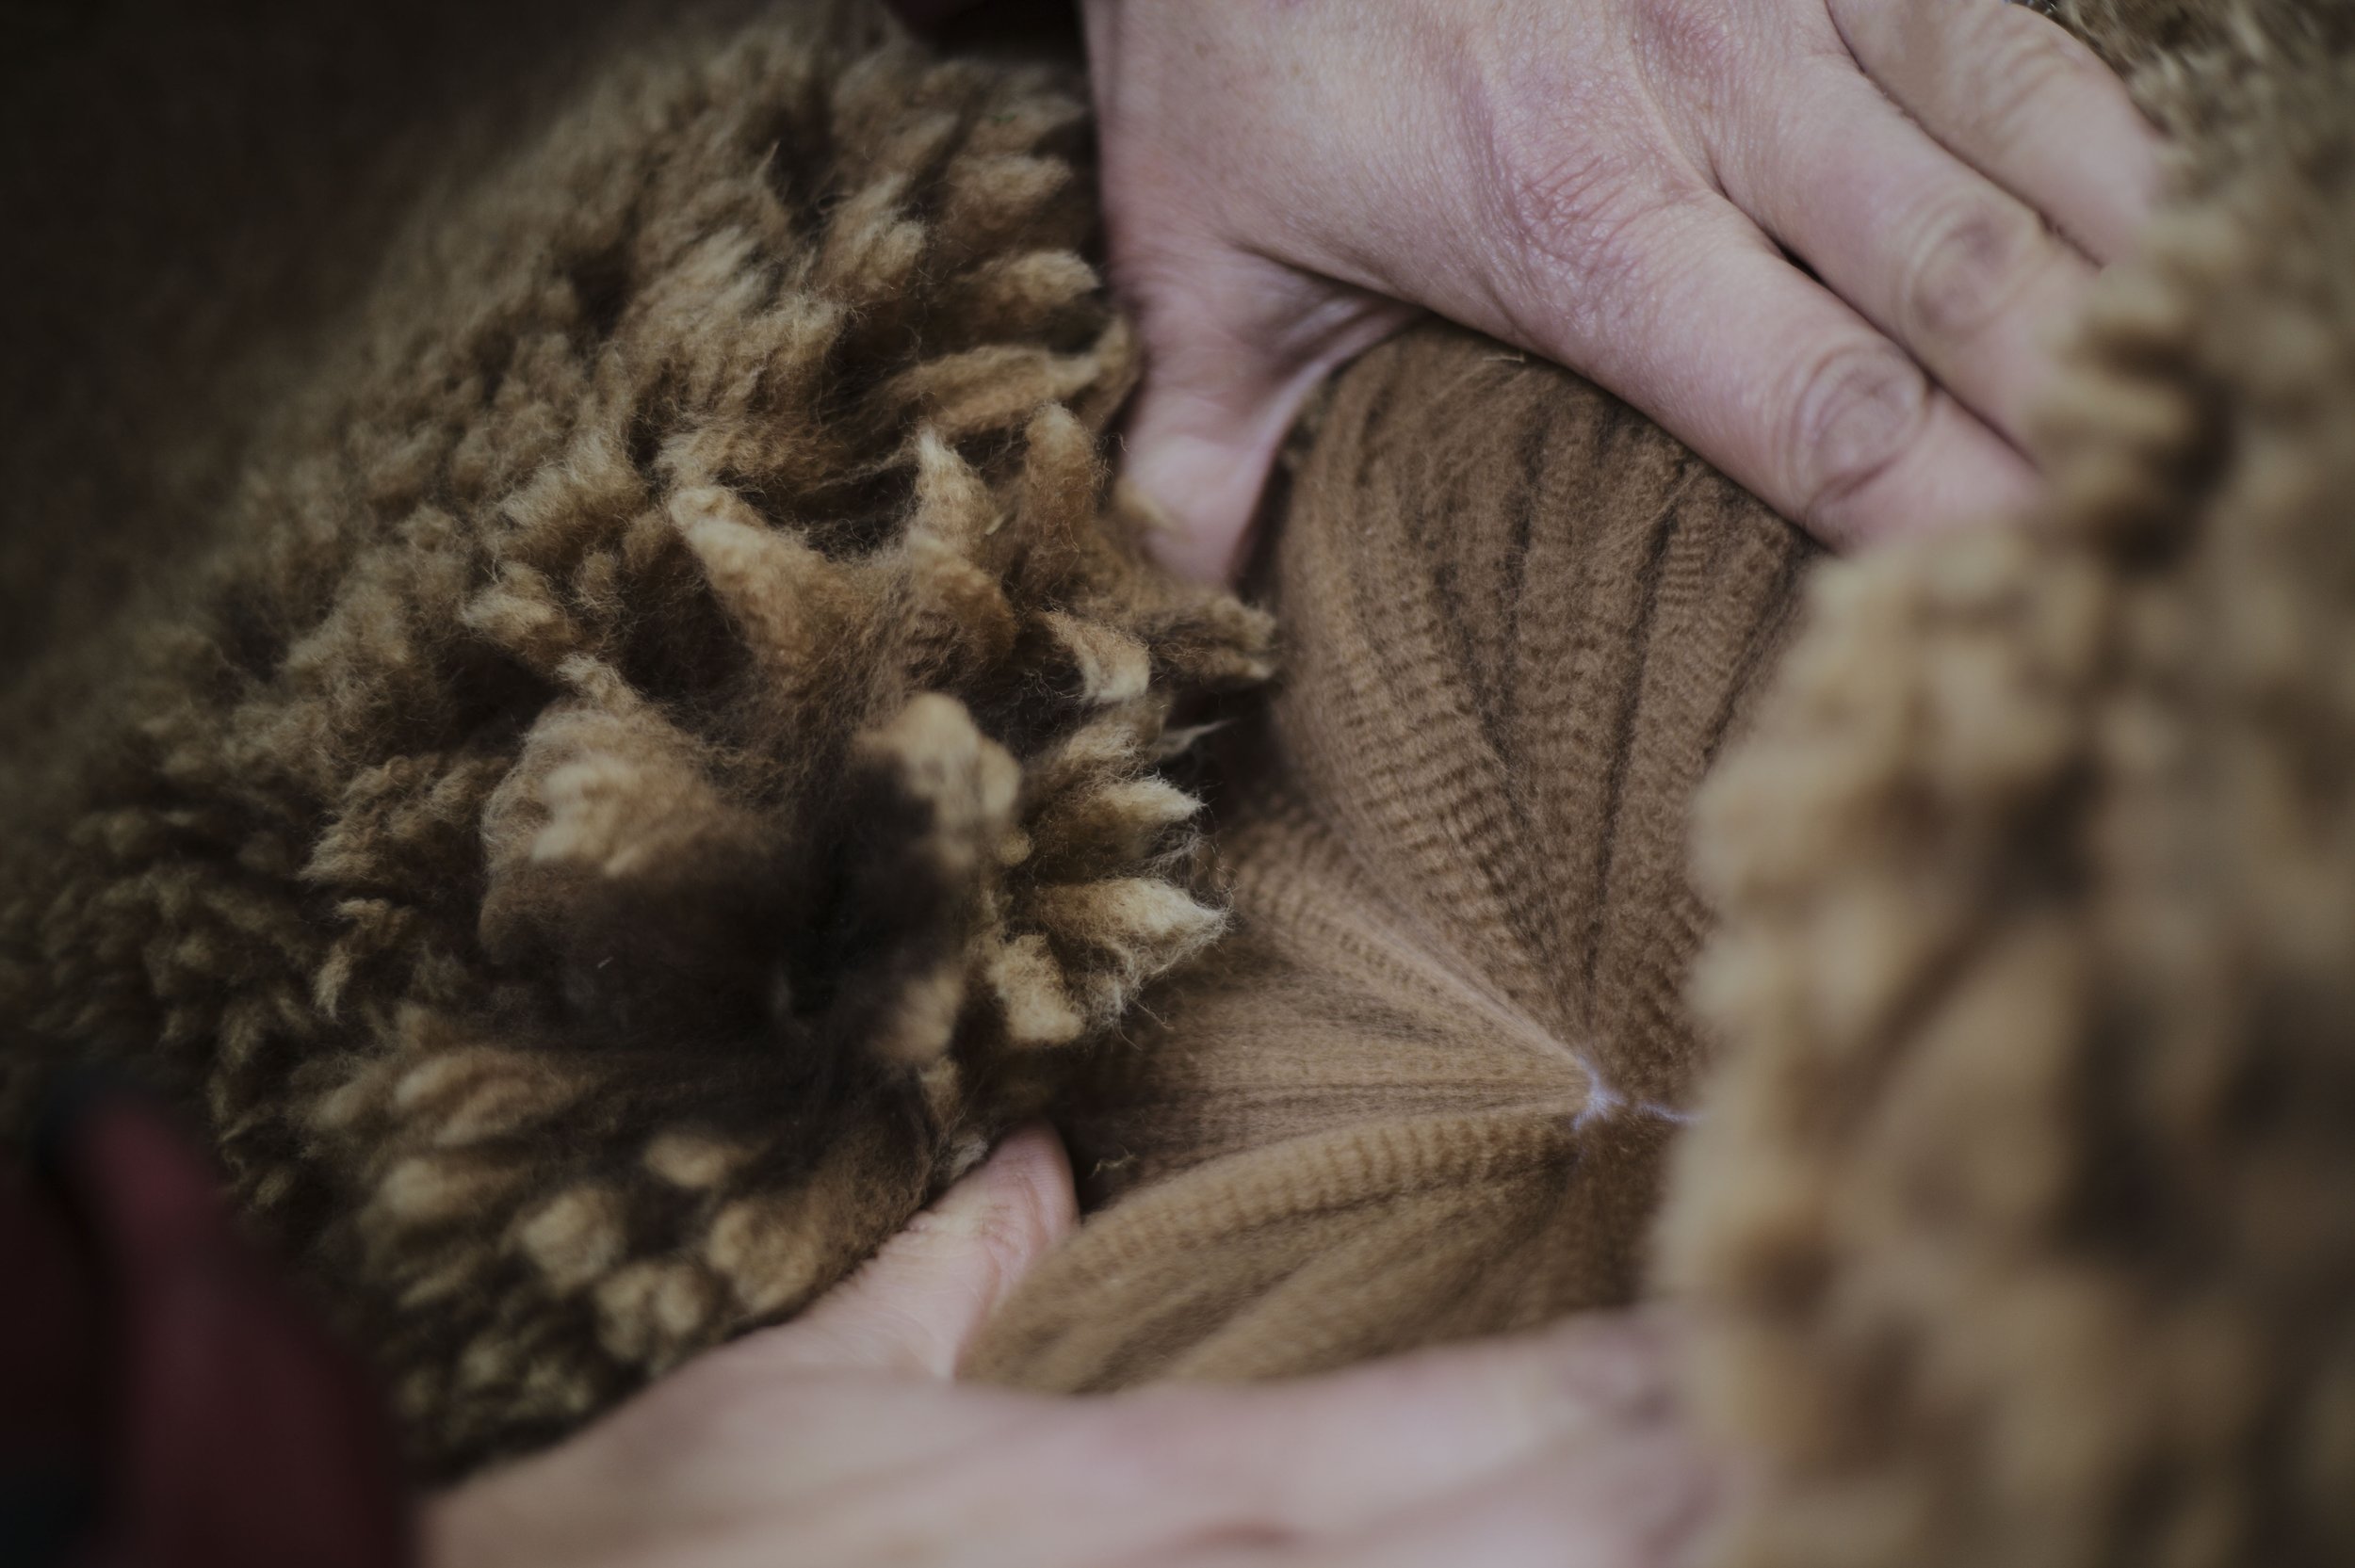  Alpaca fiber is hollow—giving it greater thermal capacity than wool, and can also be extremely fine, making it both soft and very warm. 